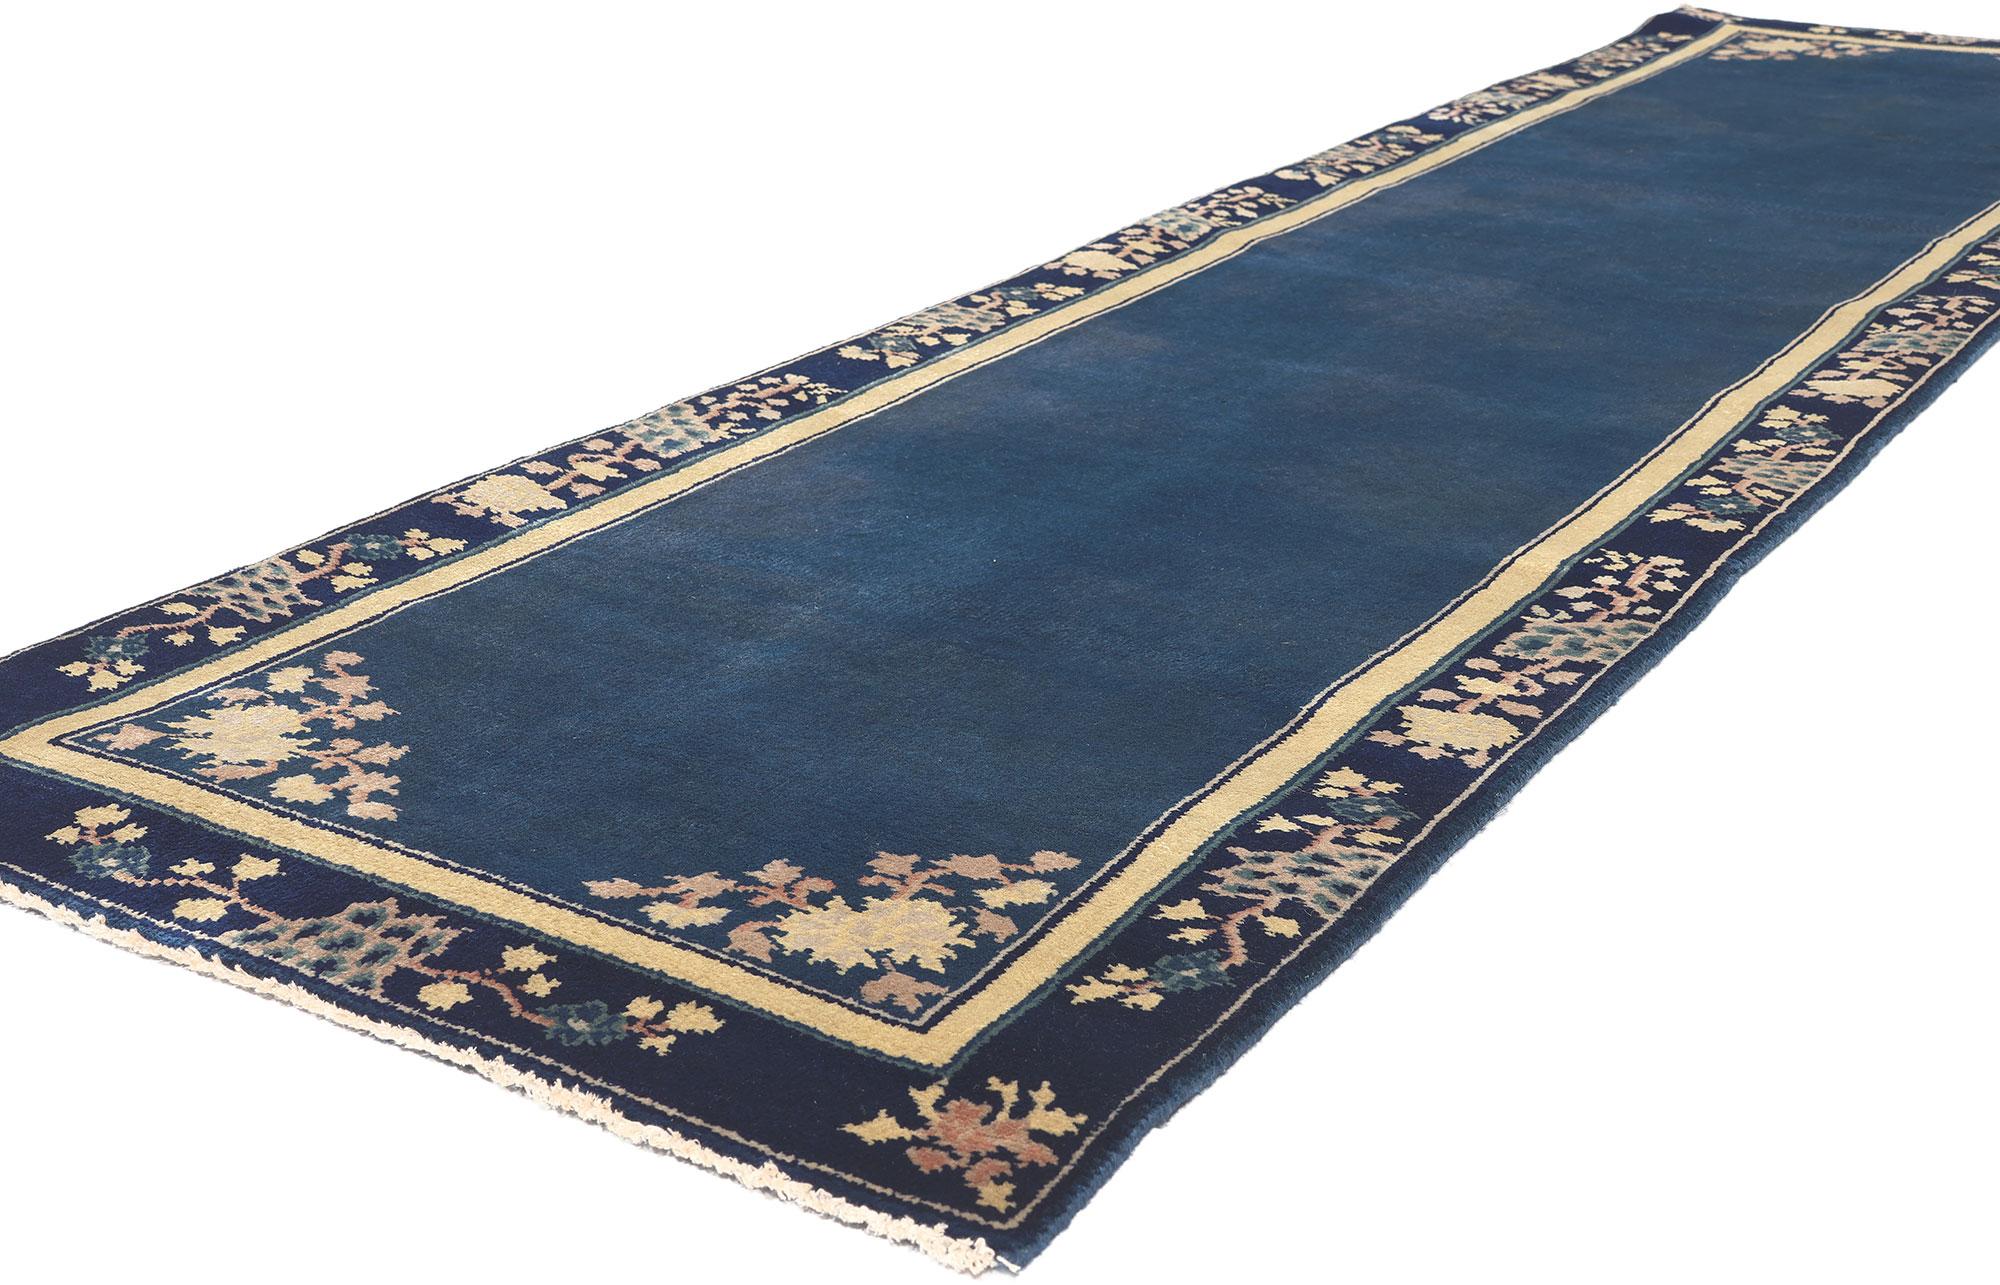 30995 Modern Chinese Art Deco Rug with Chinoiserie Chic Style, 02'05 x 09'10.
Chinoiserie Chic meets Modern Luxe in this hand knotted wool Chinese Art Deco style runner. The timeless style and lavish texture woven into this piece work together